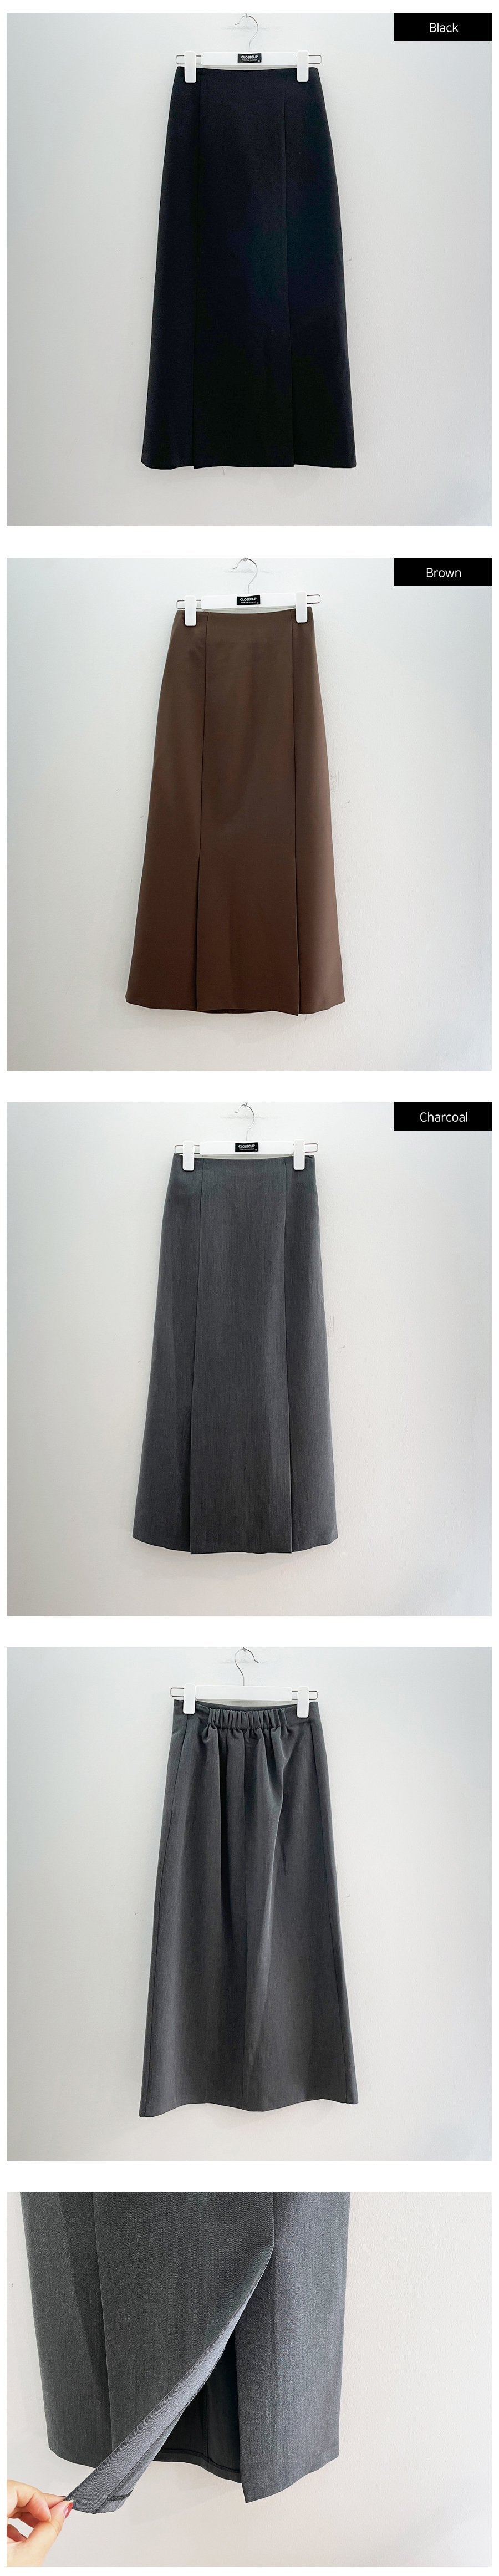 Maxi Skirt with Slit